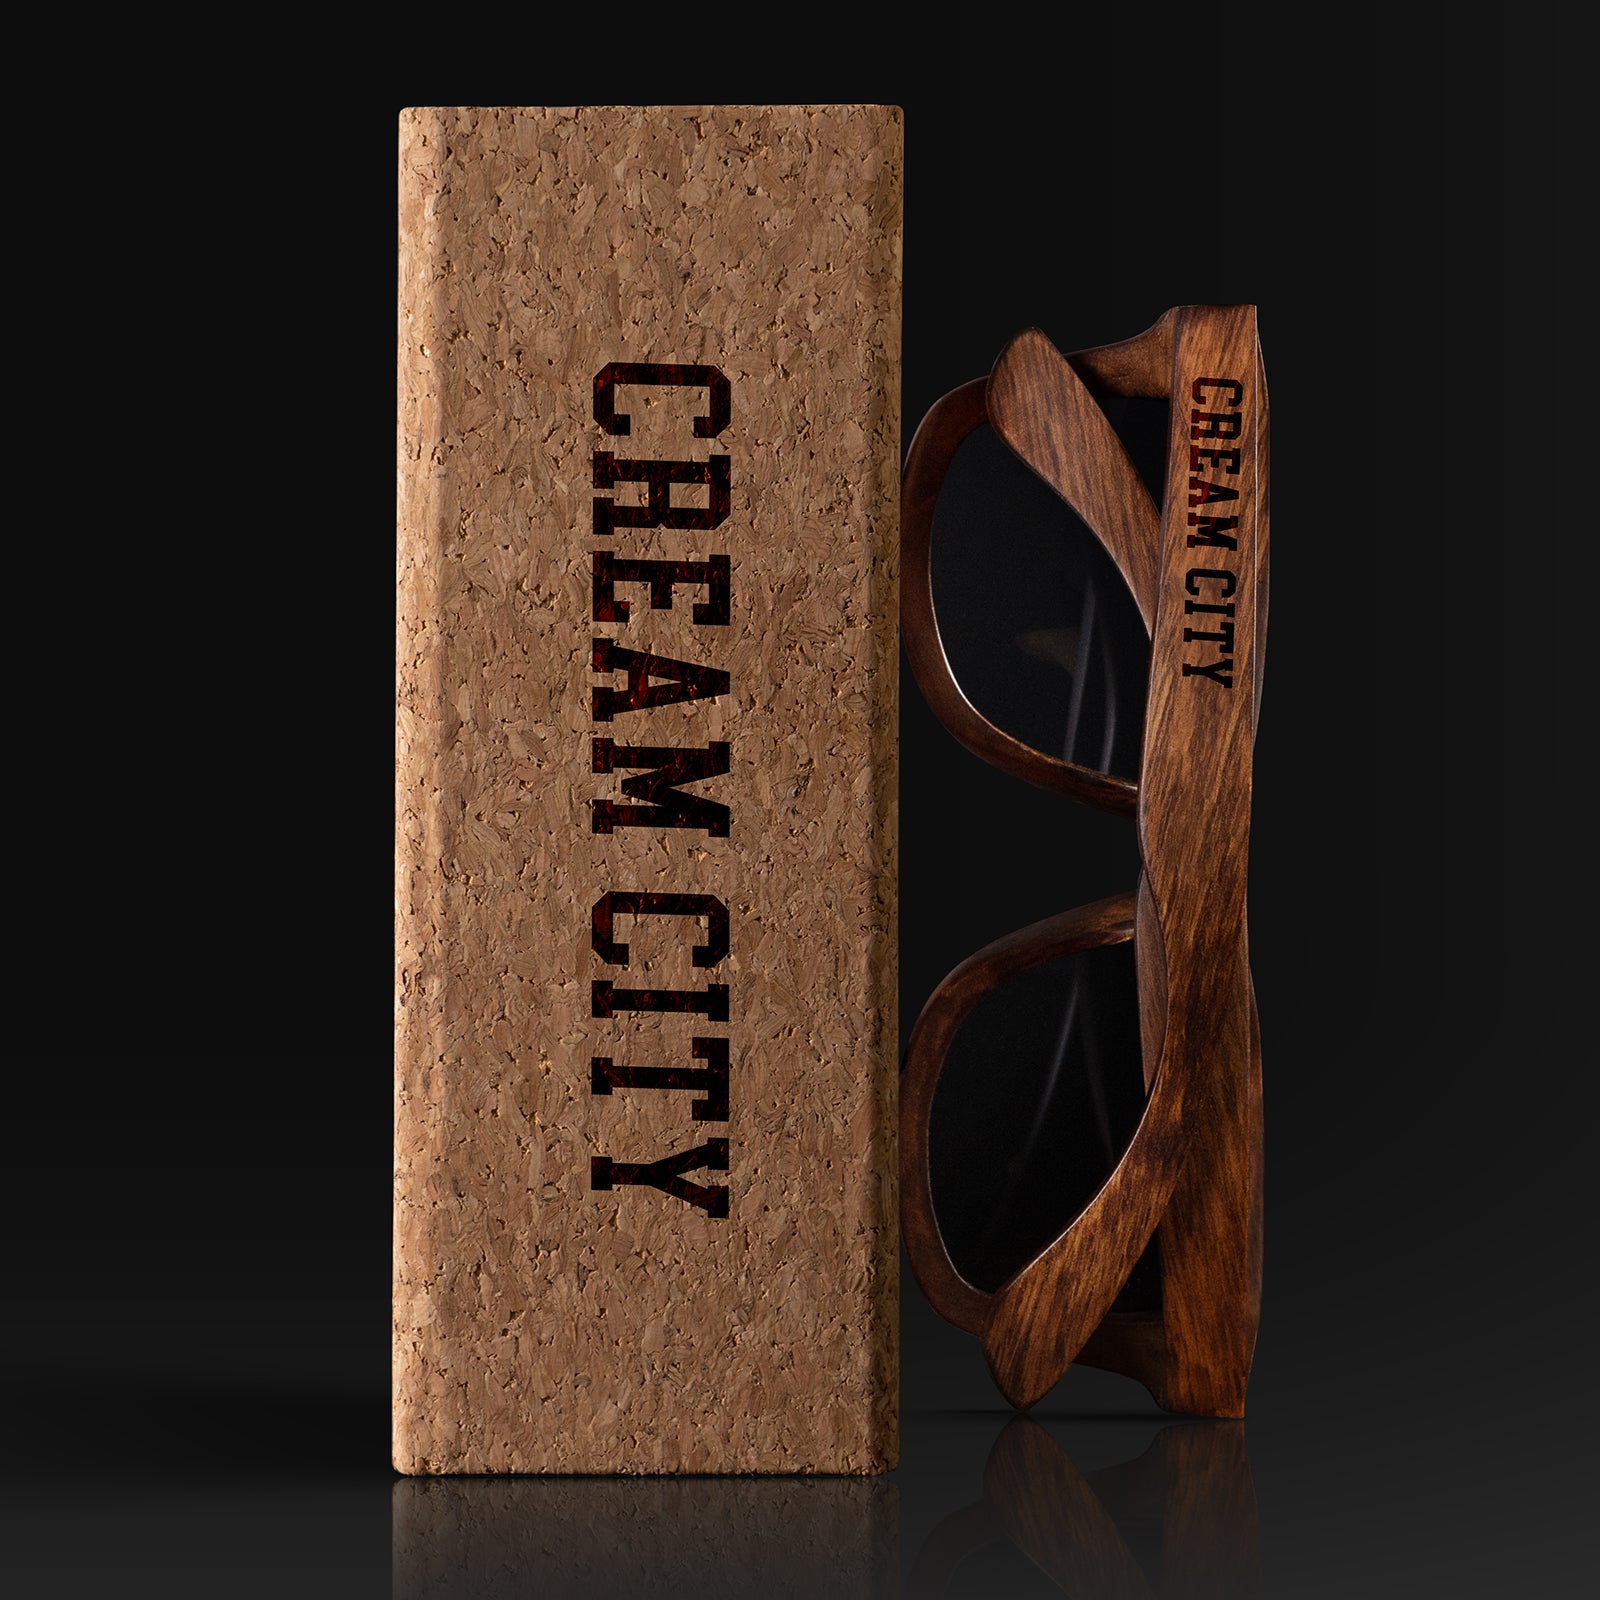 Cream City II Wisconsin Wood Sunglasses with custom engraving. Custom Cream City II Wisconsin Gifts For Men -  Sustainable Cream City II Wisconsin eco friendly products - Personalized Cream City II Wisconsin Birthday Gifts - Unique Cream City II Wisconsin travel Souvenirs and gift shops. Cream City II Wisconsin Wayfarer Eyewear and Shades wiith Box